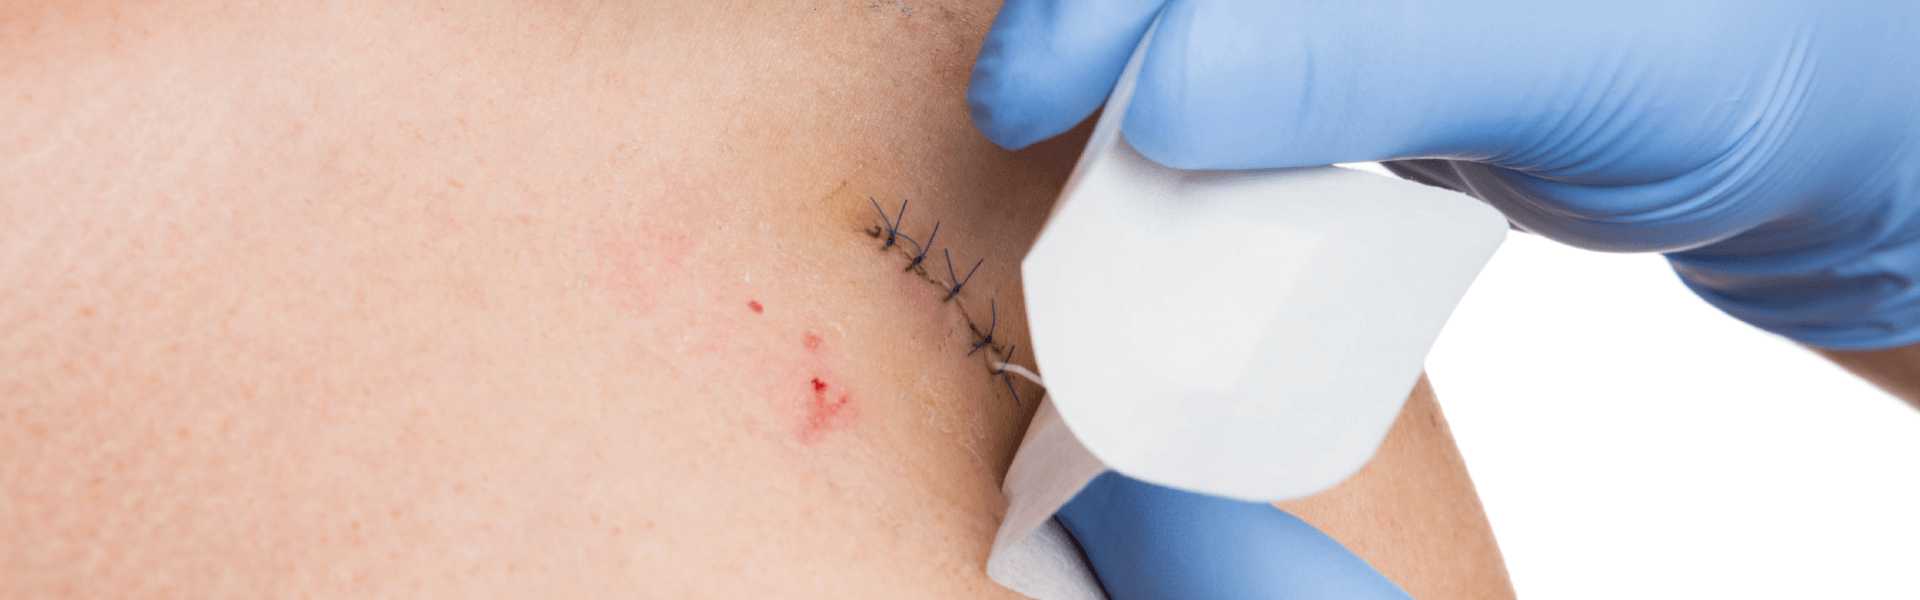 Suture Removal in Jaipur